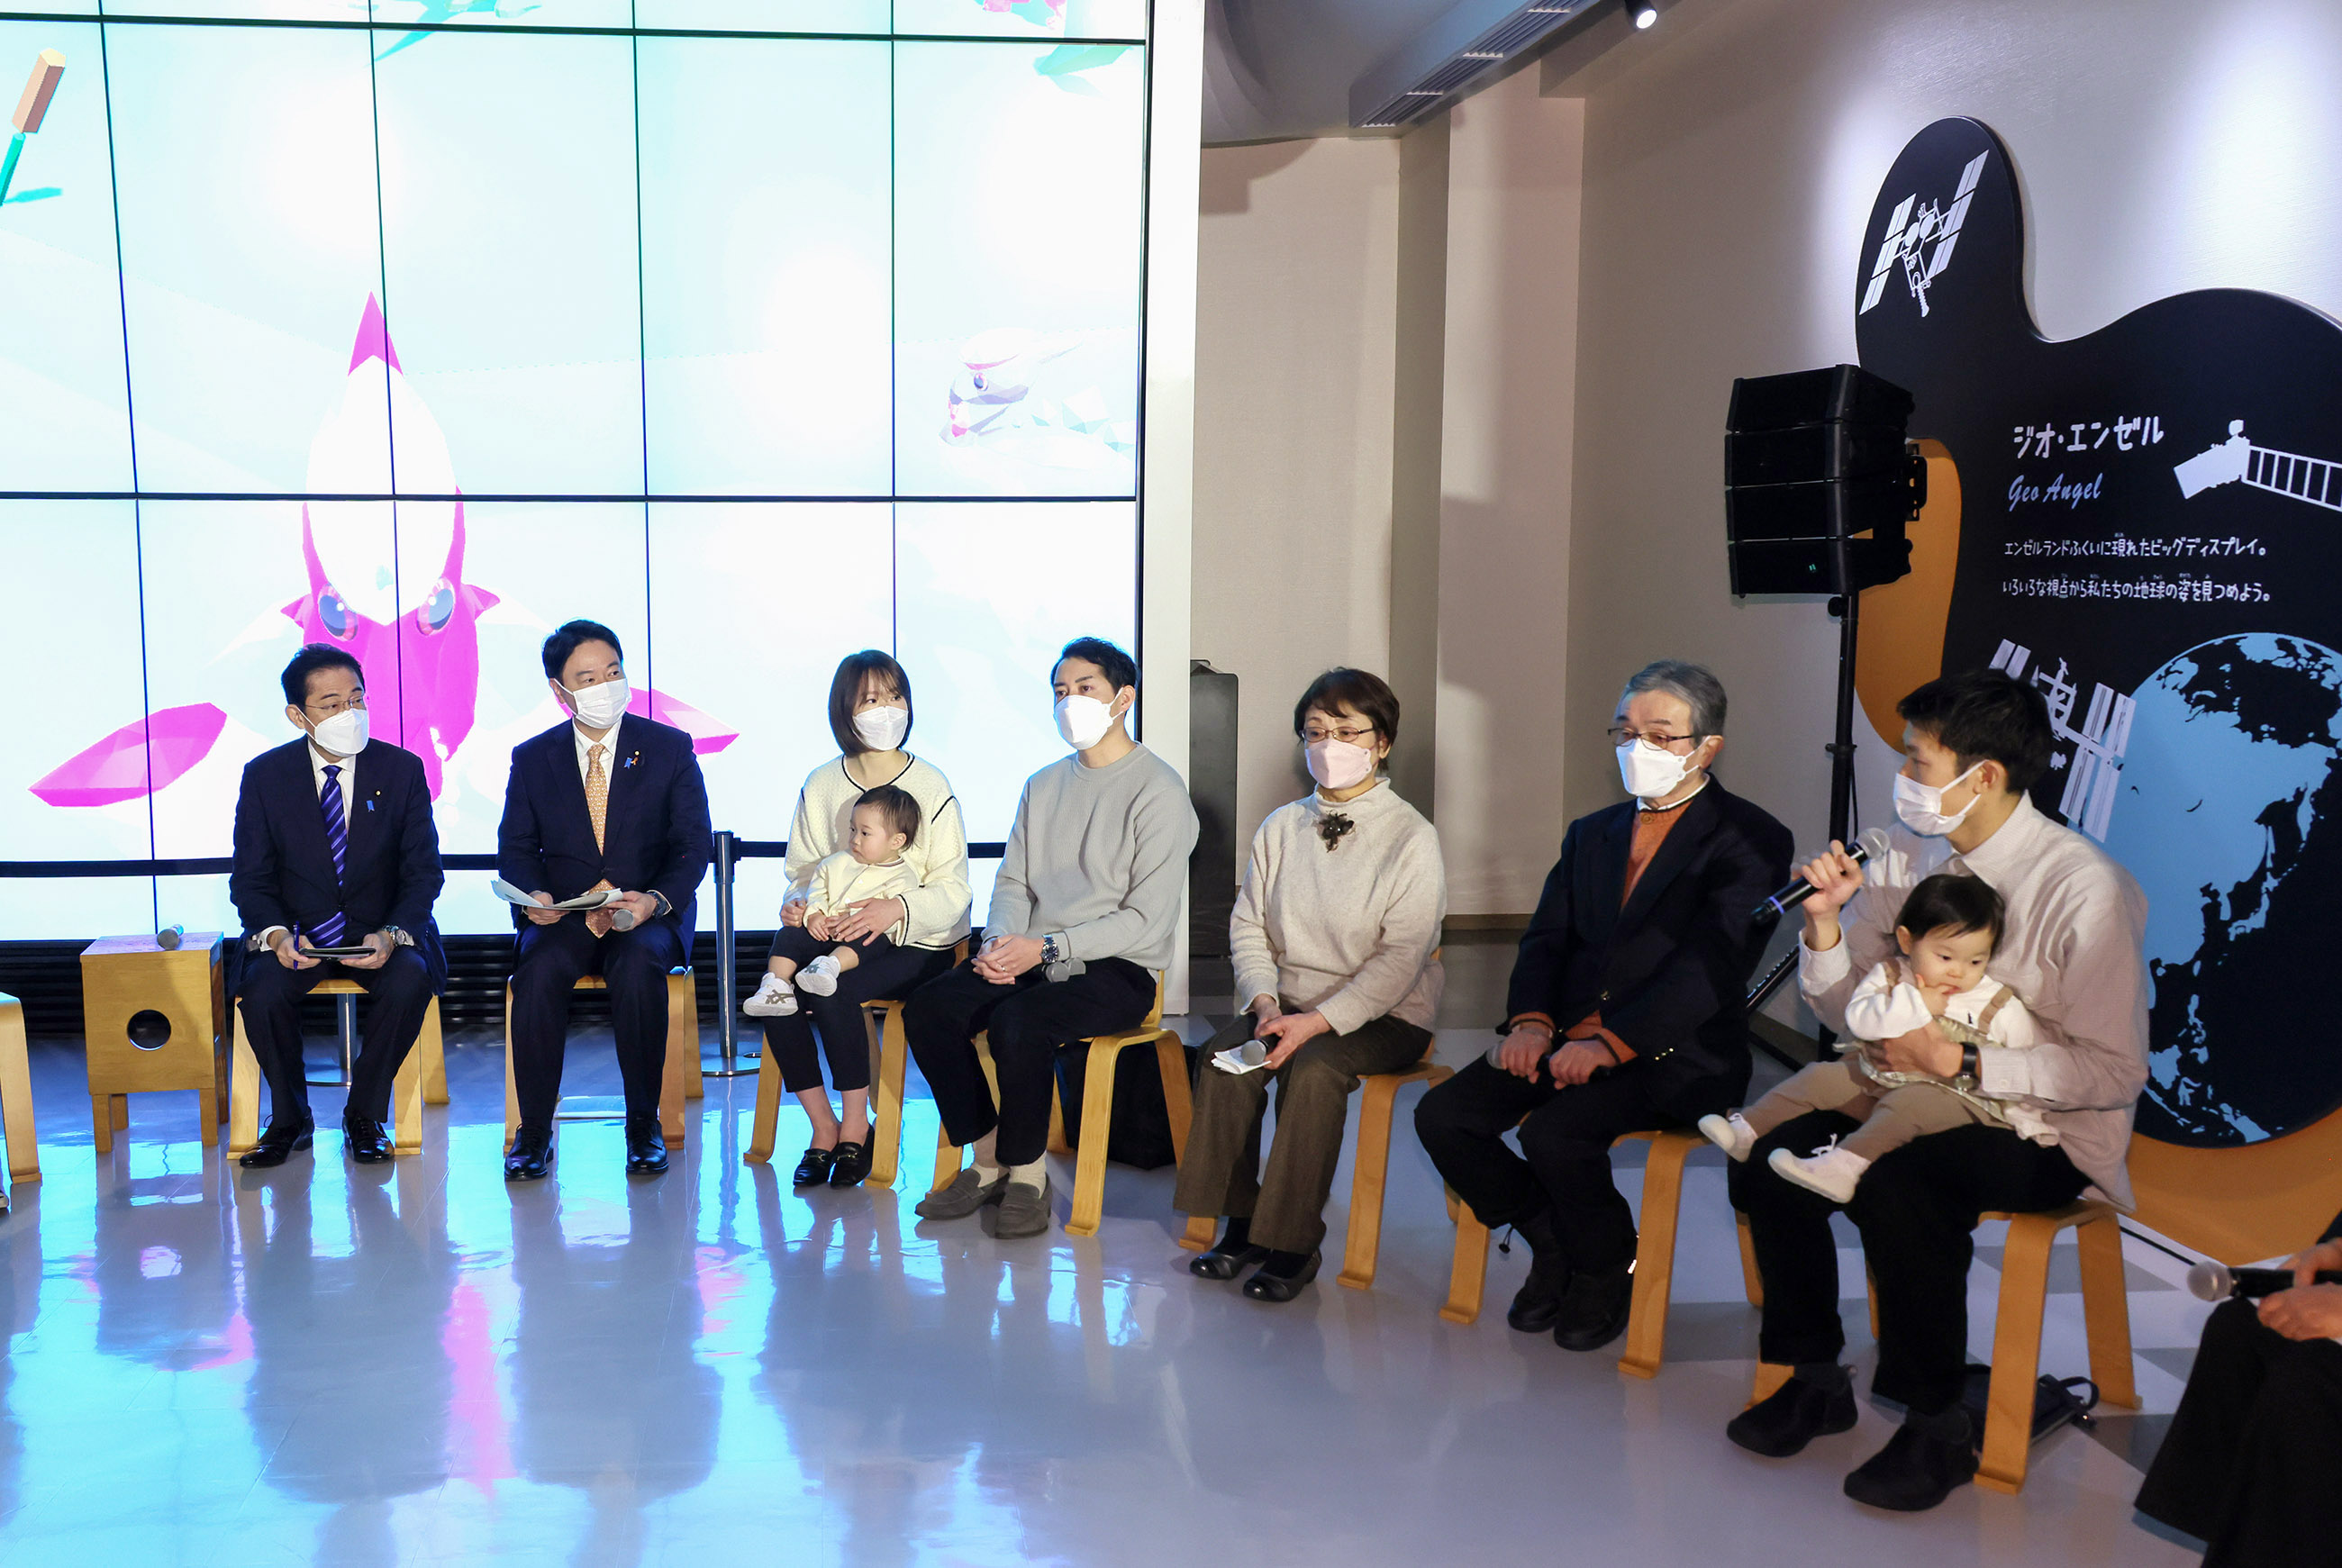 Prime Minister Kishida listening to other participants in a public dialogue on policies related to children (2)